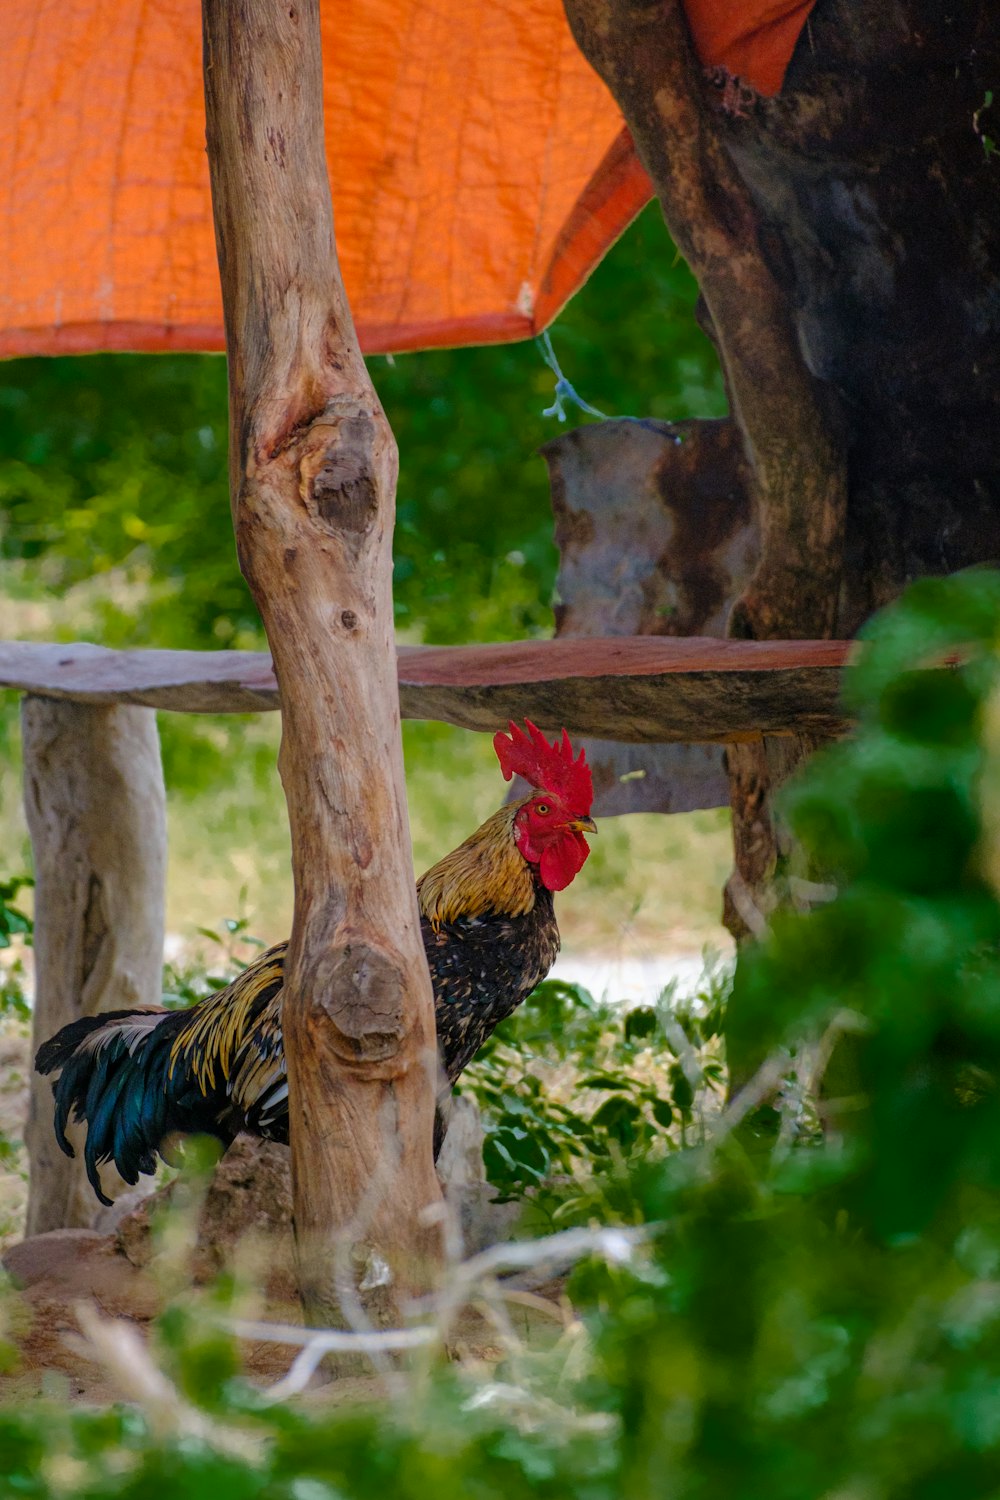 a rooster is standing in the shade under a tree